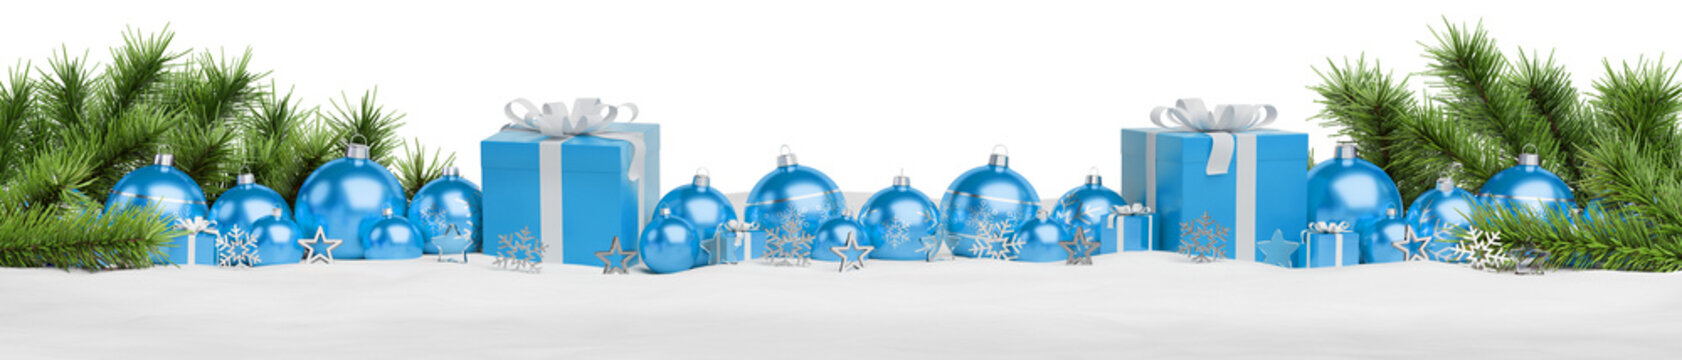 Isolated glossy christmas decoration lined up on white. 3D rendering blue shiny baubles ornaments. Gifts with bows and glossy golden stars. Merry Xmas cut out background